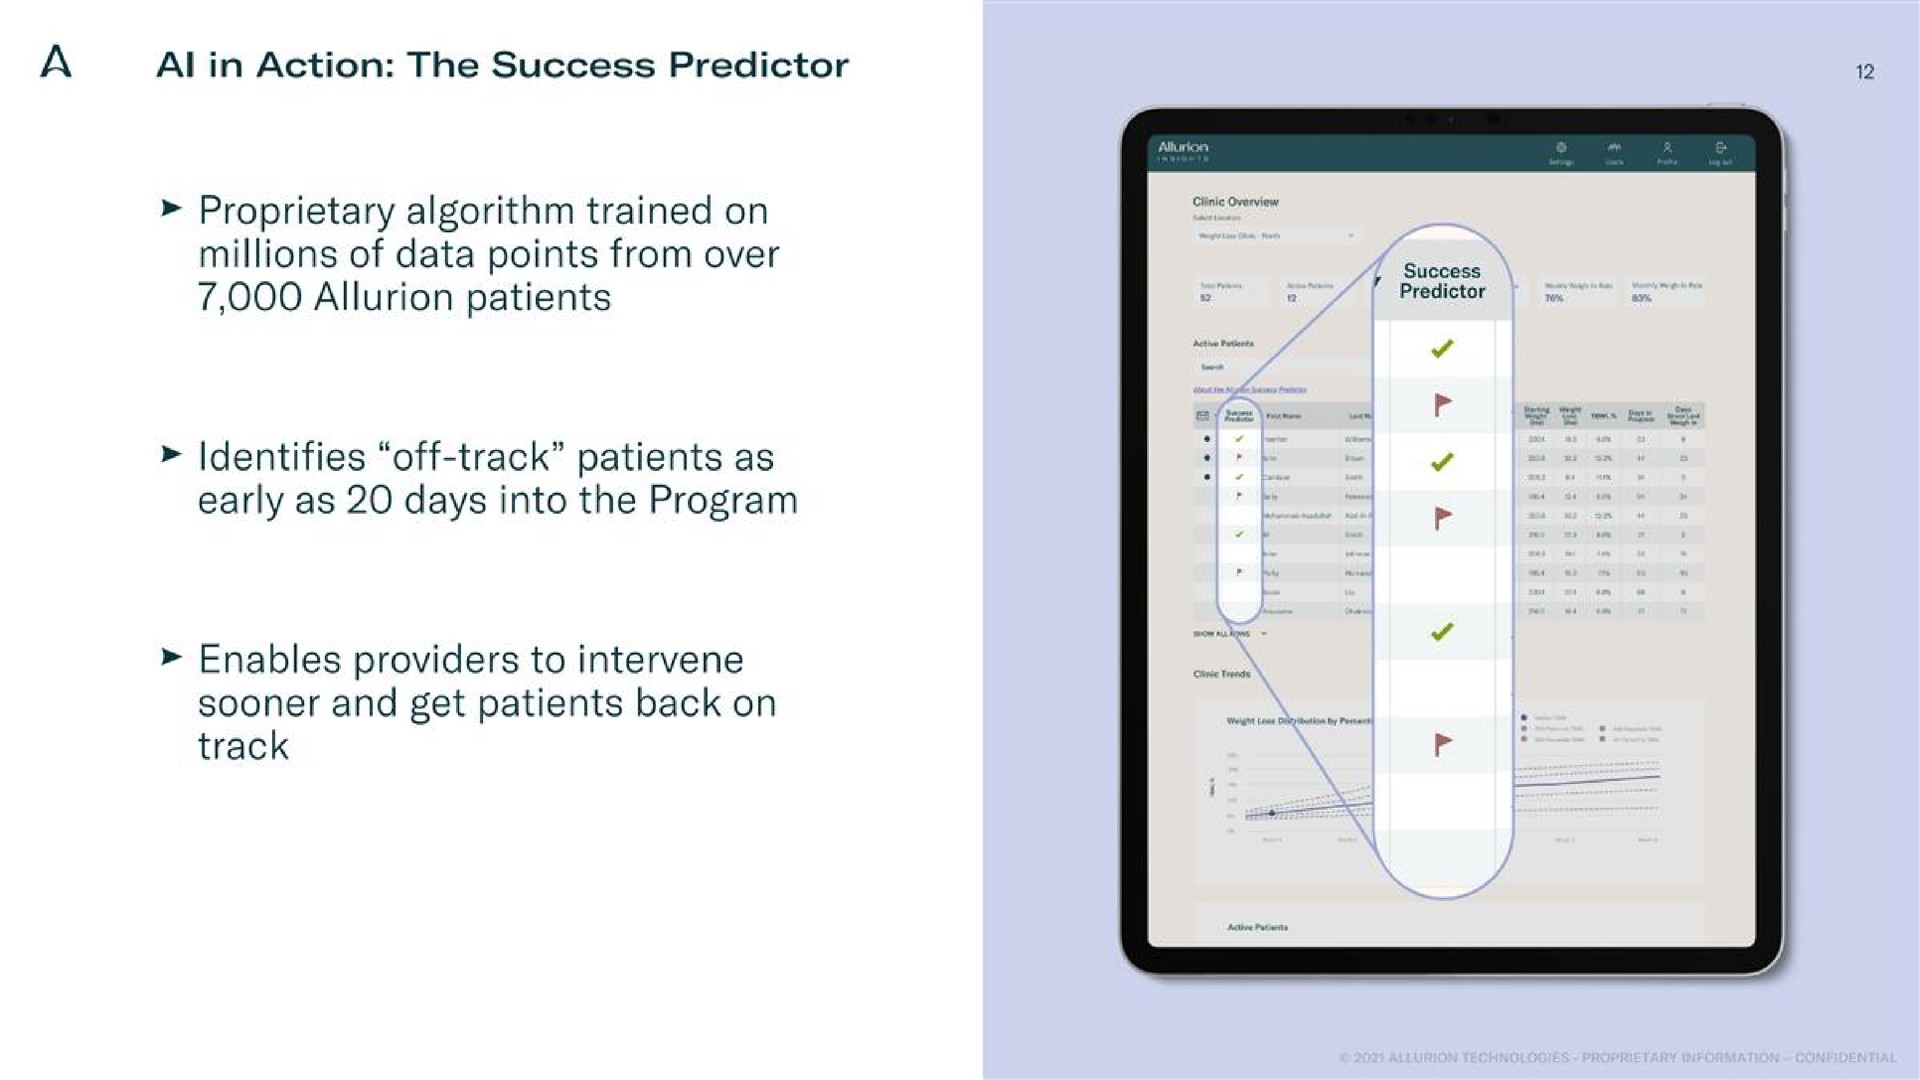 proprietary algorithm trained on millions of data points from over patients identifies off track patients as early as days into the program predictor enables providers to intervene sooner and get patients back on track | Allurion